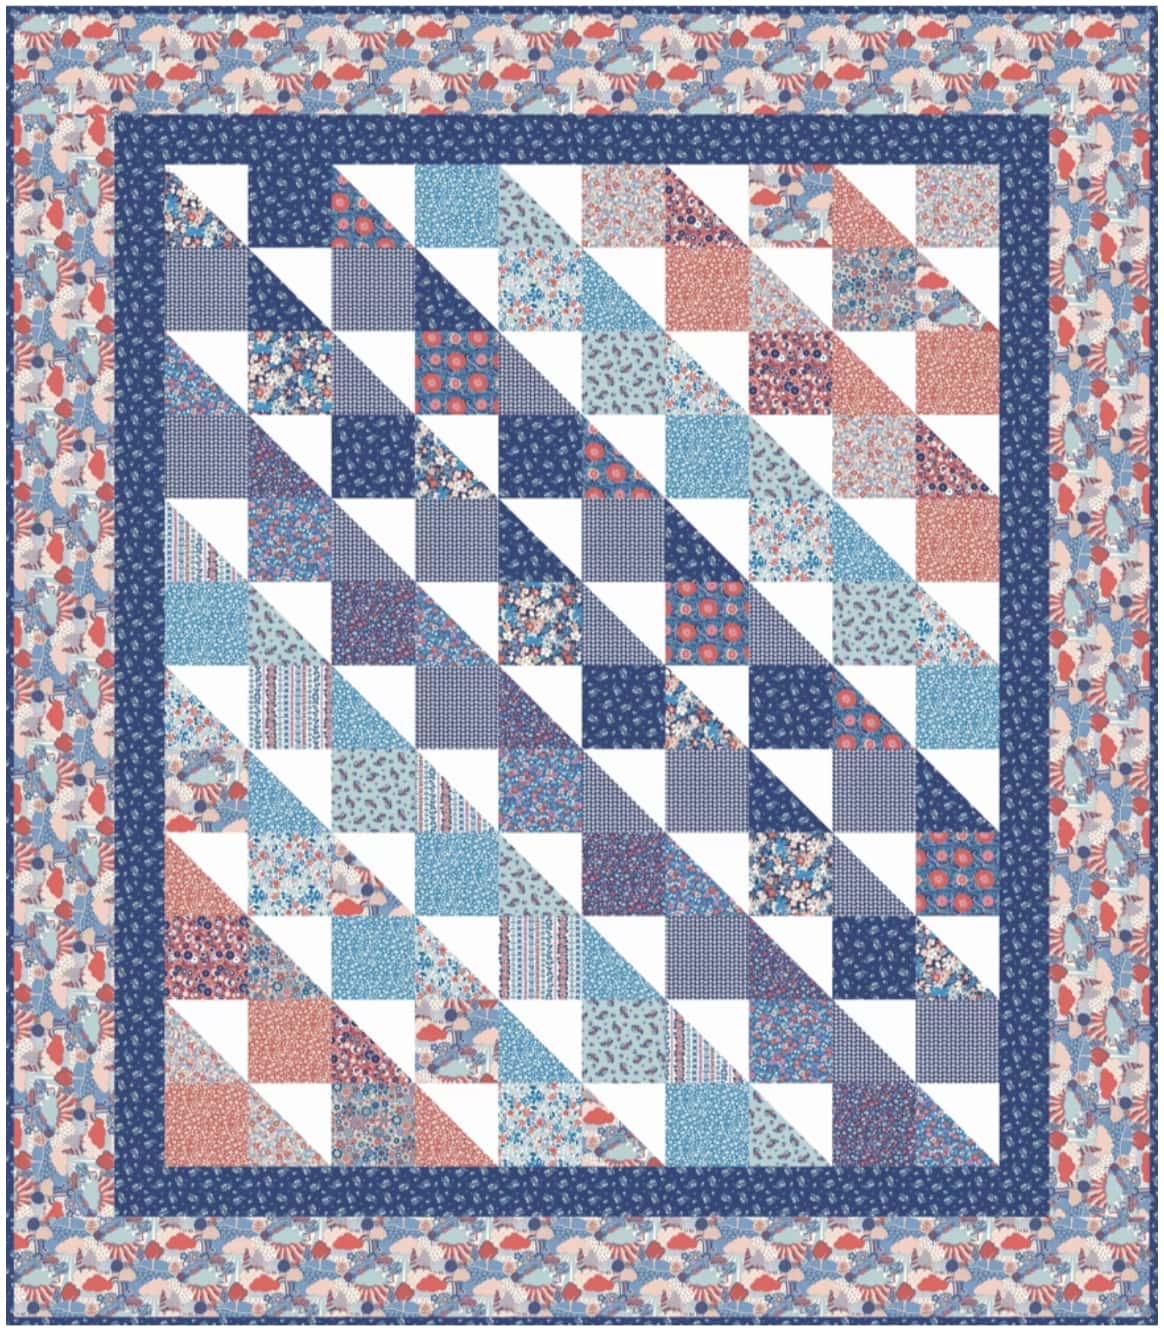 Layer cake quilt patterns you'll love - 10 free! - From Britain